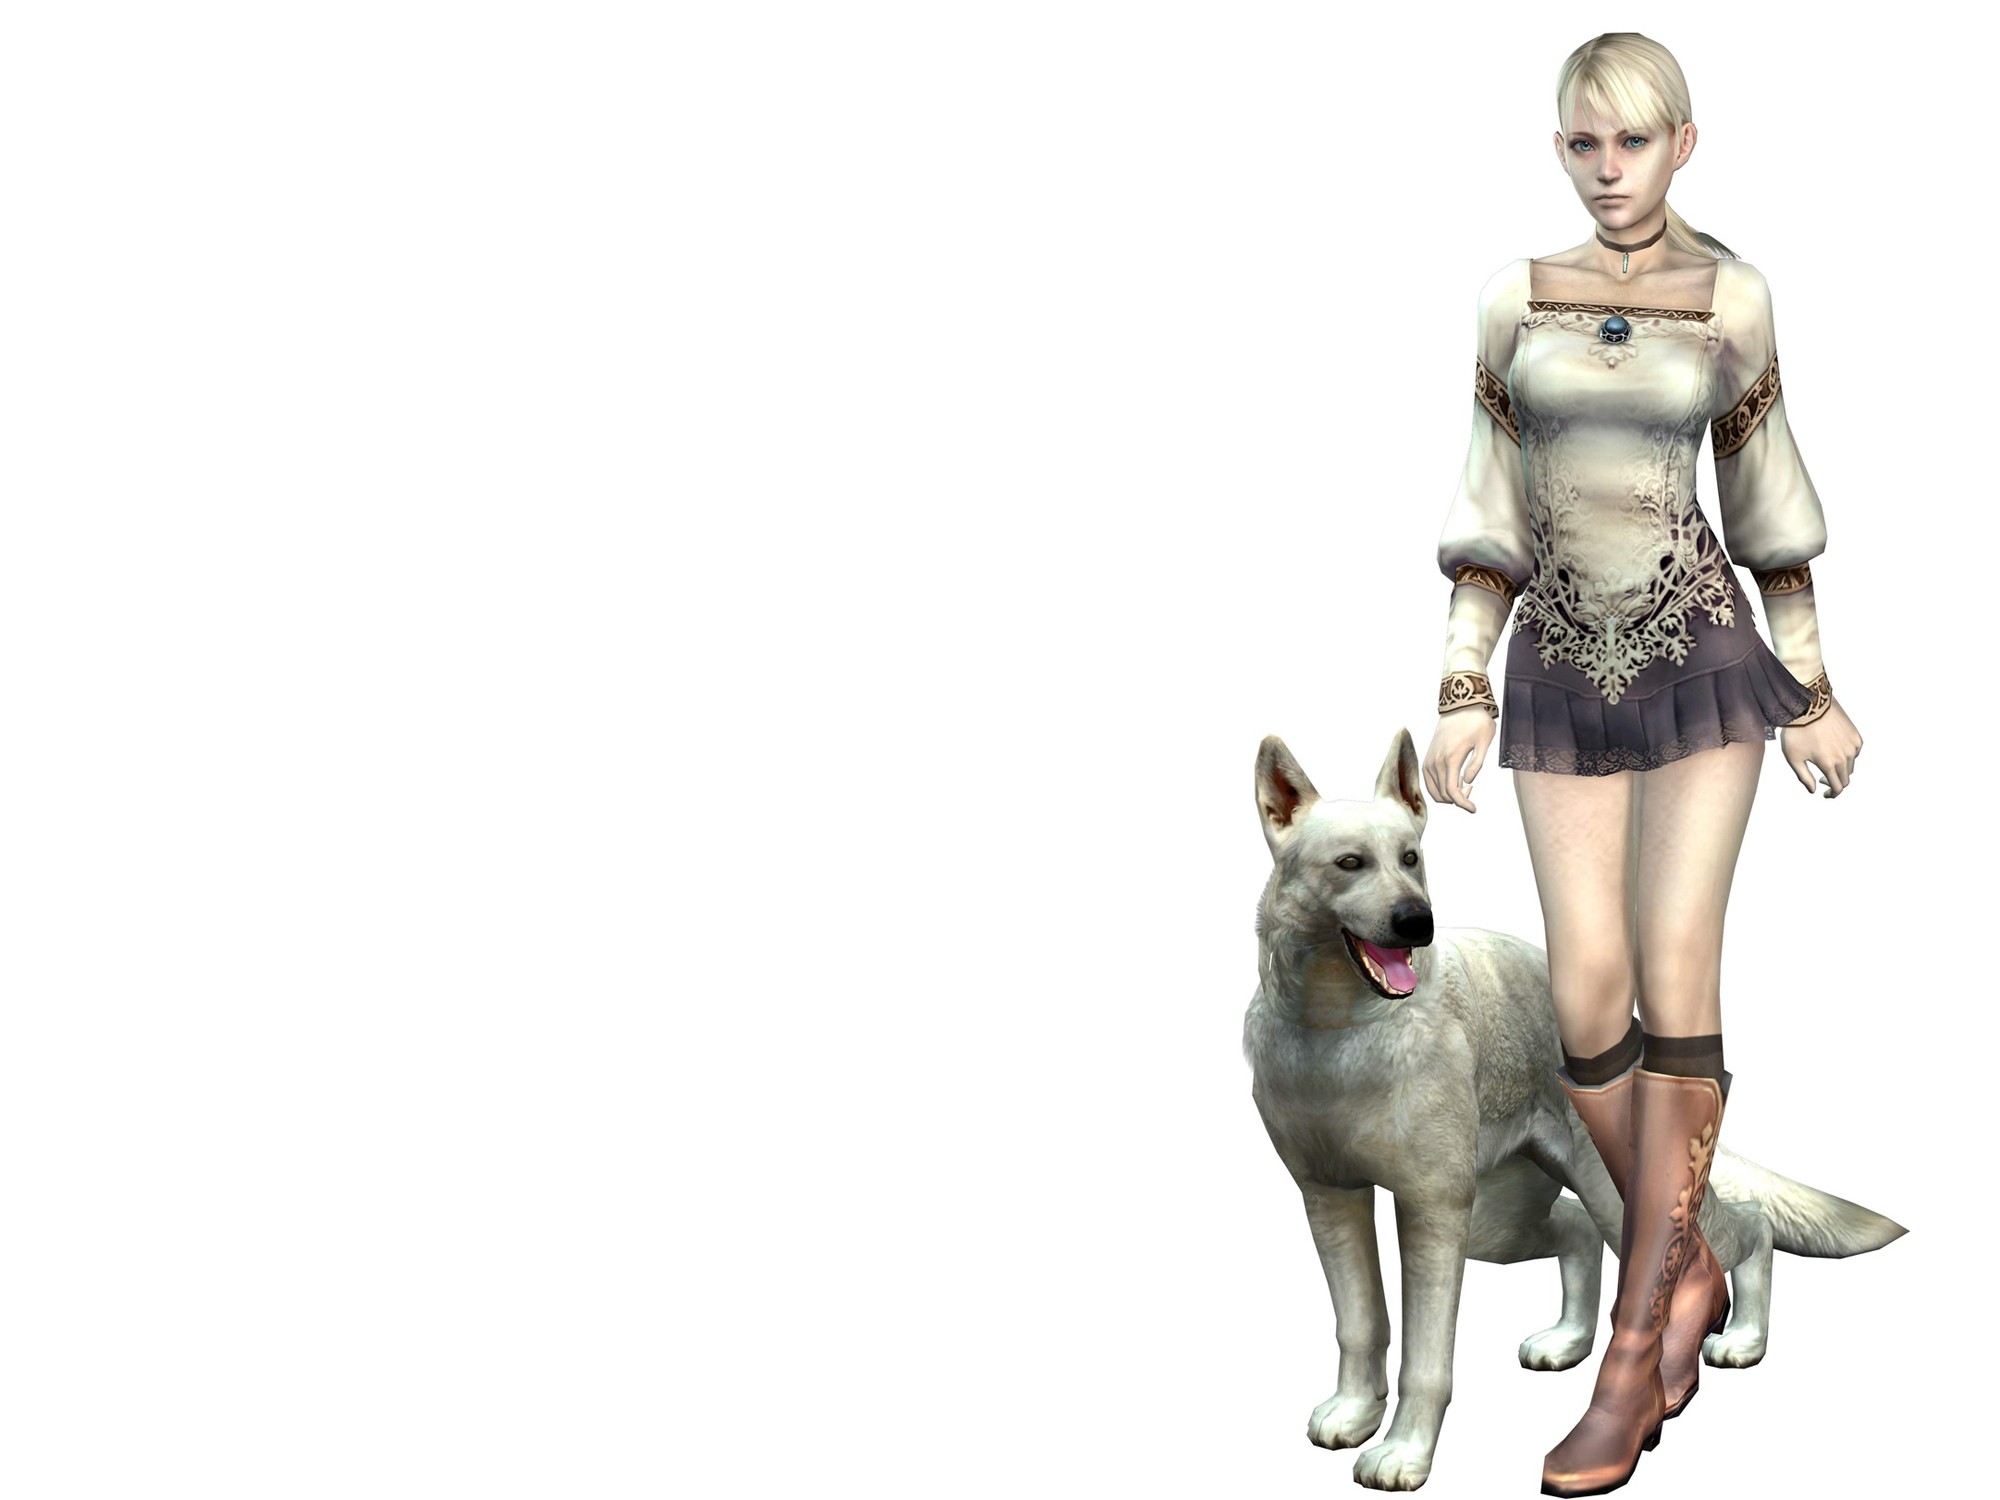 blondes, Women, 3d, View, Video, Games, Dogs, Terror, Simple, Background Wallpaper